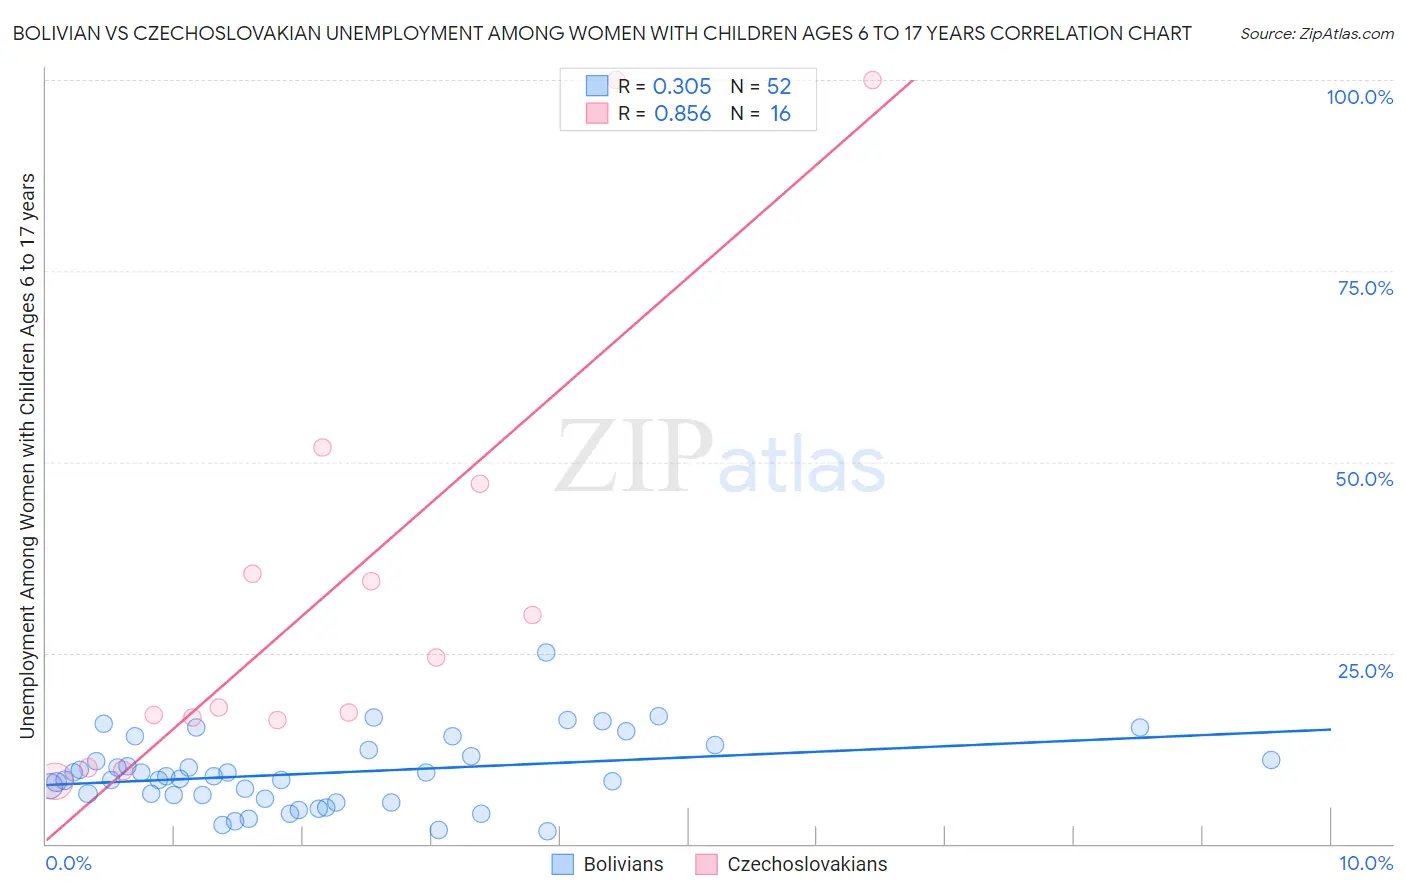 Bolivian vs Czechoslovakian Unemployment Among Women with Children Ages 6 to 17 years